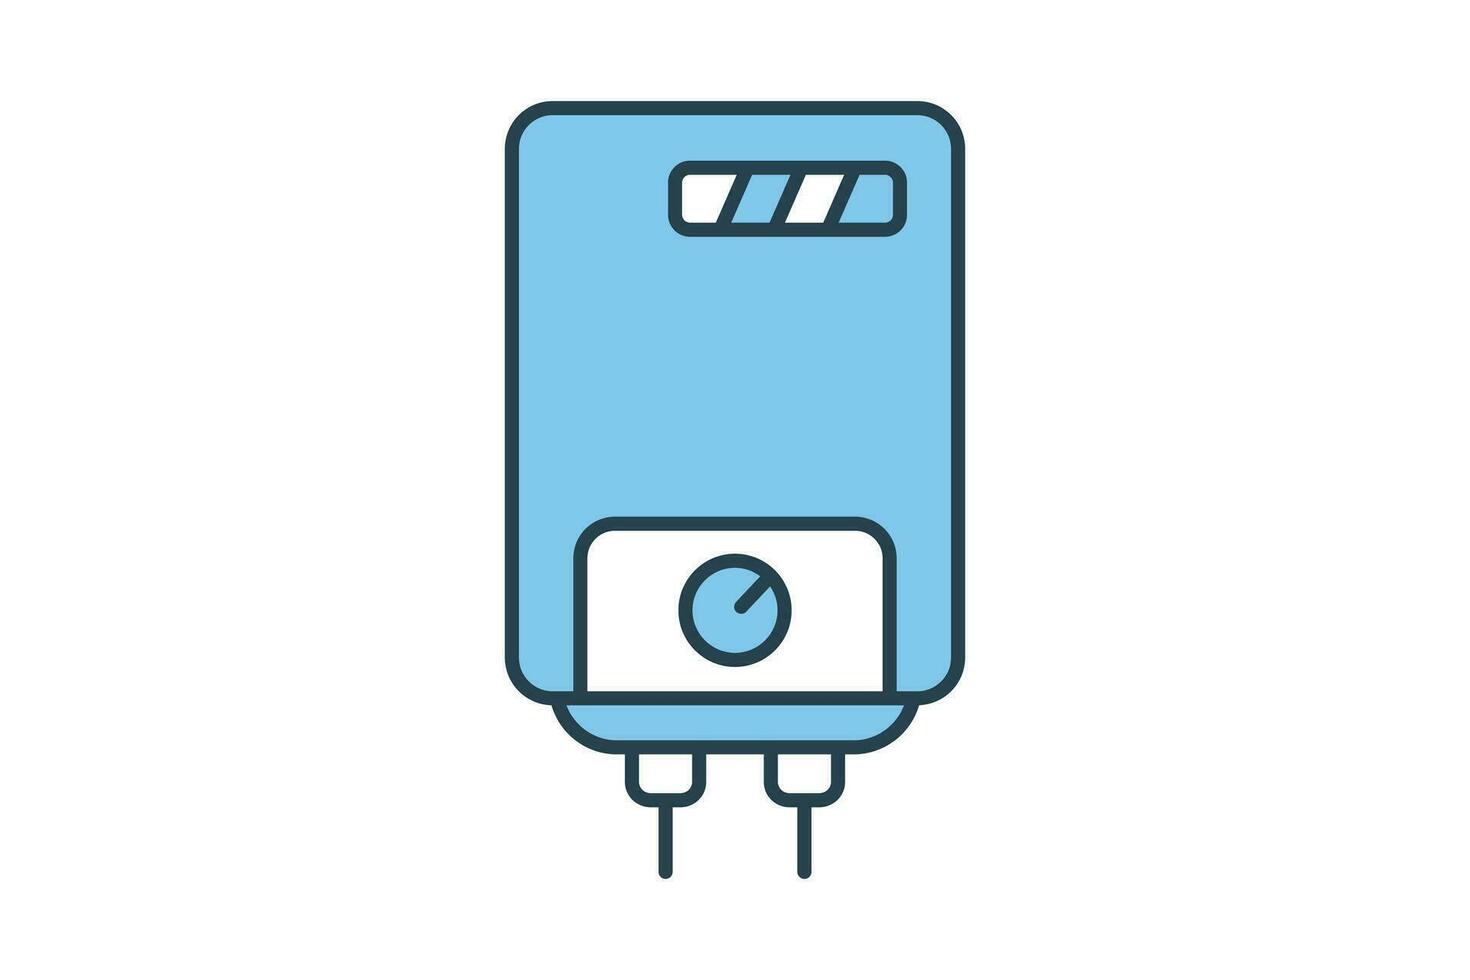 Water heater icon. icon related to electronic, household appliances. Flat line icon style design. Simple vector design editable